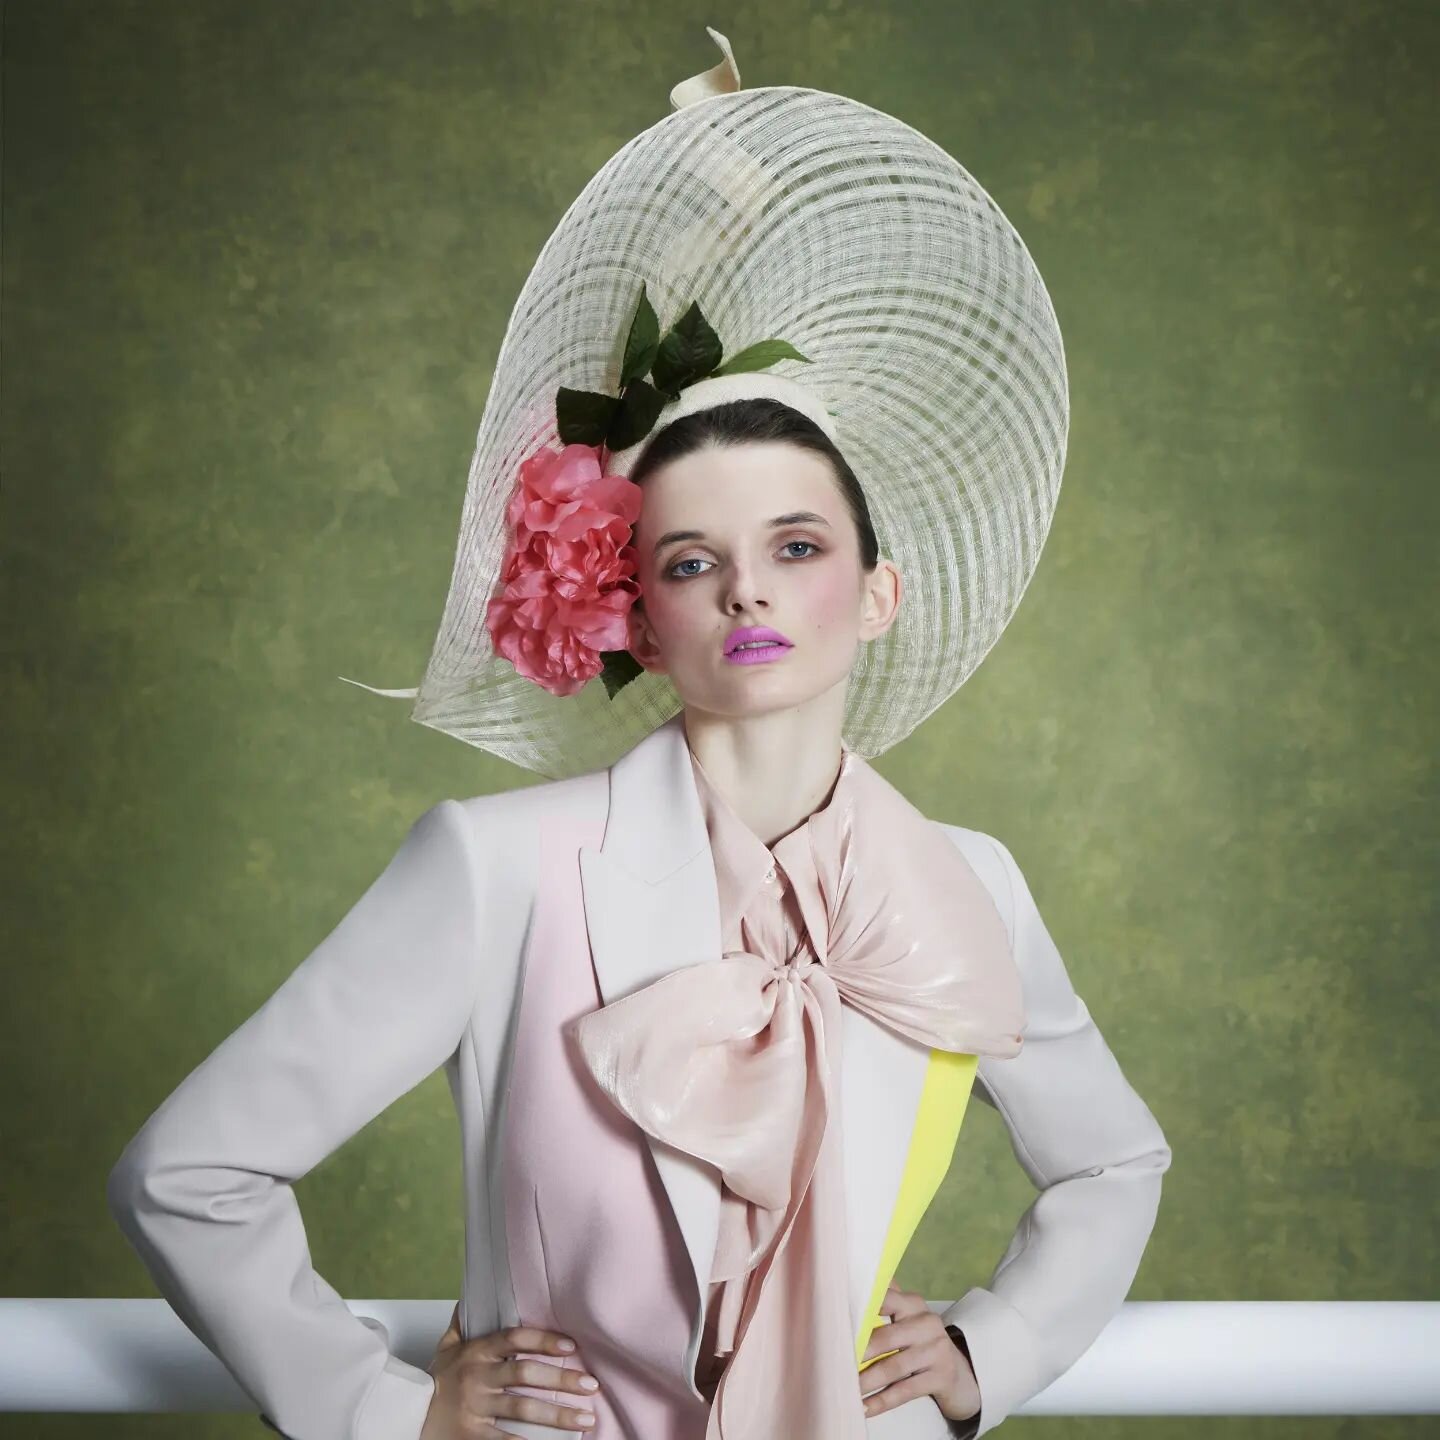 We are so pleased and honoured to be in the 2023 Royal Ascot Collective again this year, with our hat 'English Rose'. Love these gorgeous photos too!

Ascot Racecourse and Official Royal Ascot Millinery Sponsor Fenwick are delighted to present the Ro